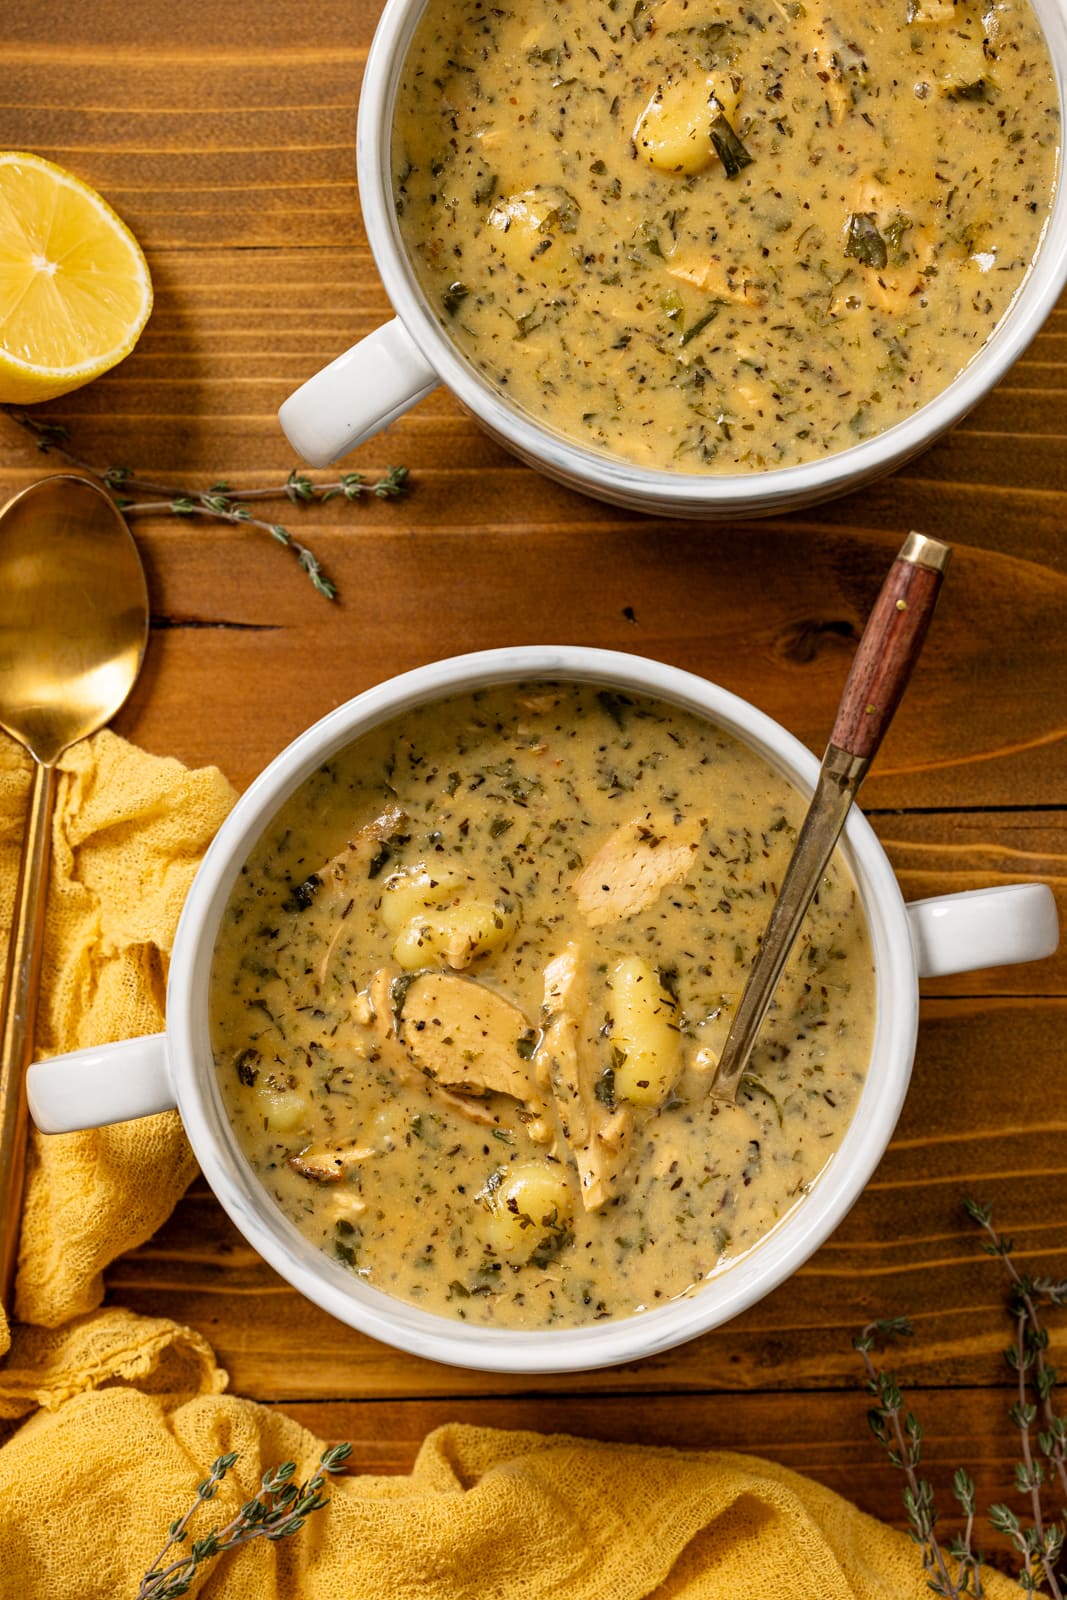 Bowls of creamy chicken soup with spoons and lemon wedges.